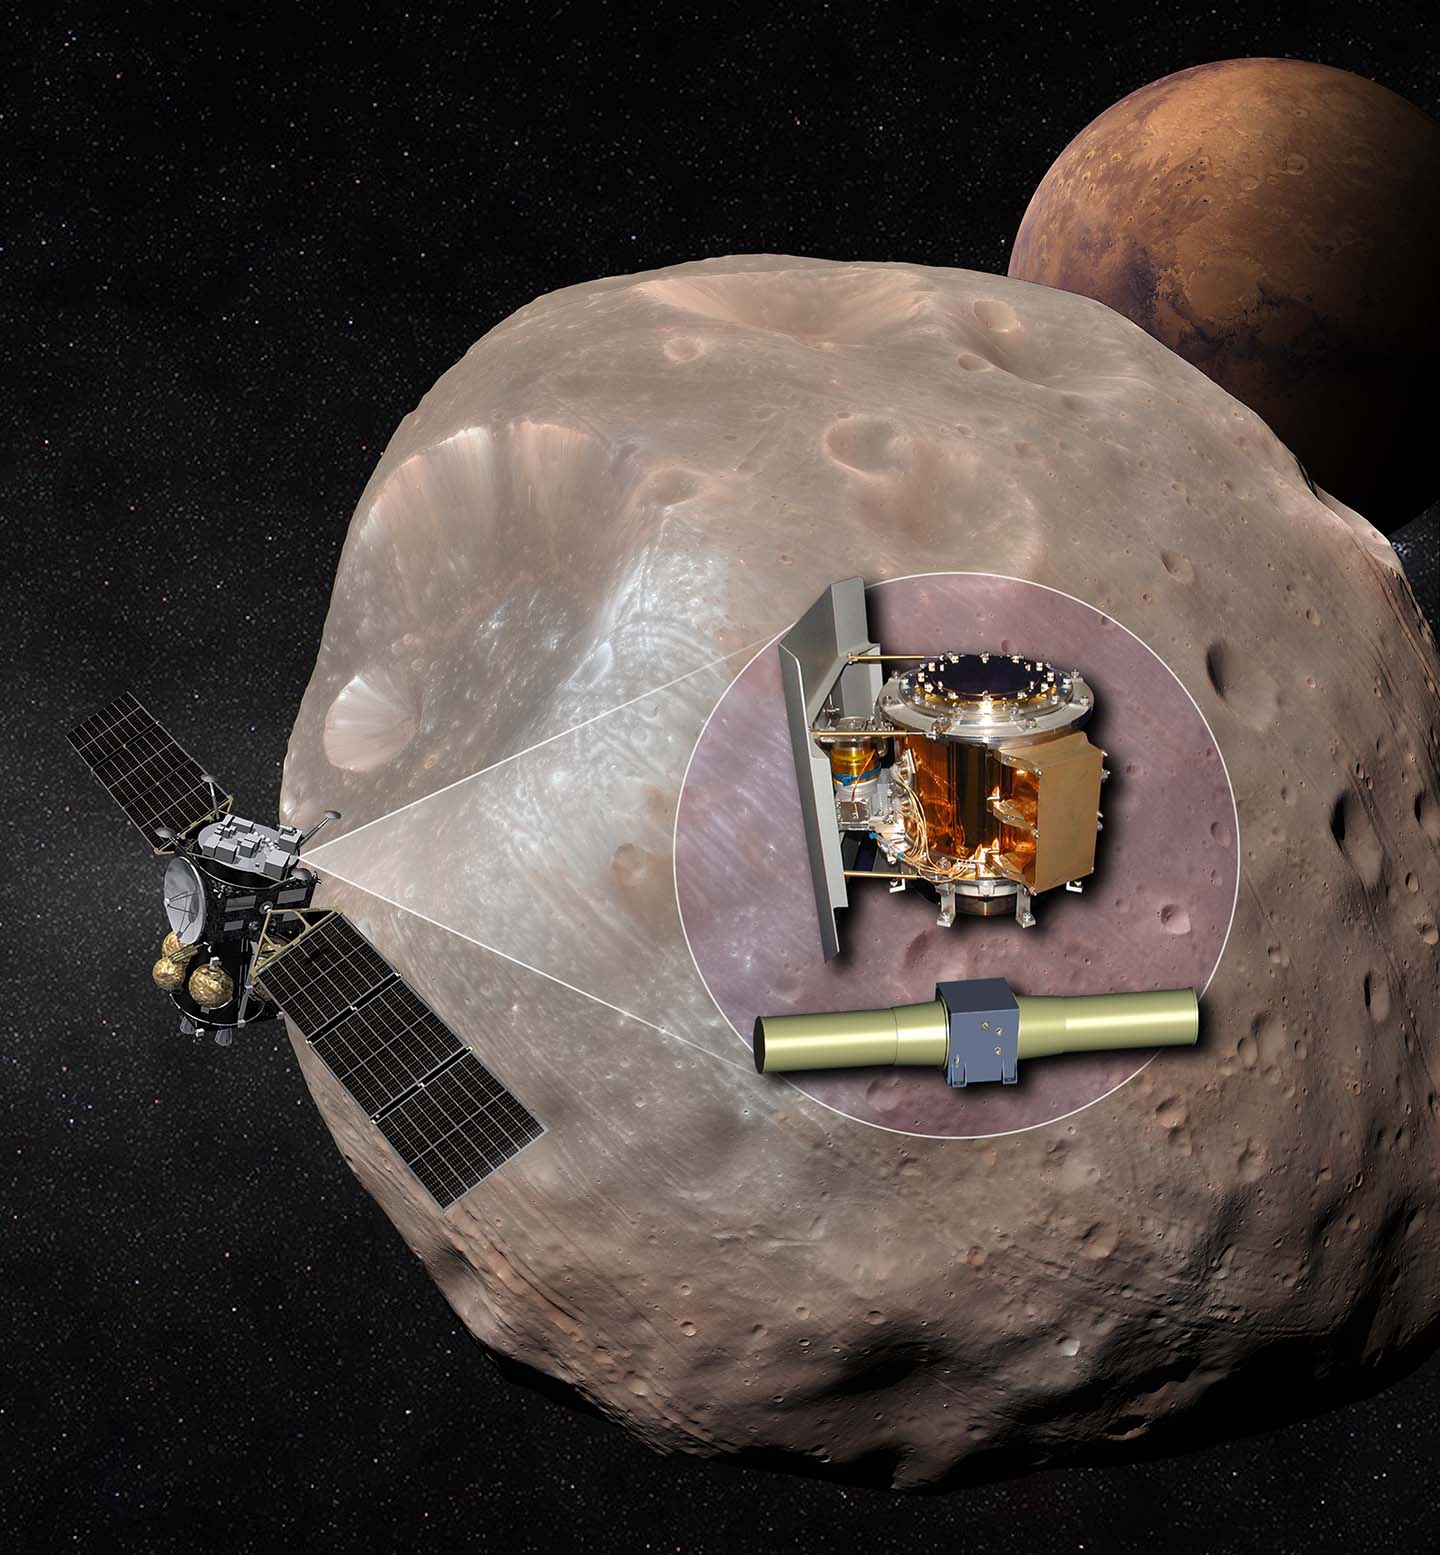 Artist’s concept of the Japan Aerospace Exploration Agency’s MMX mission